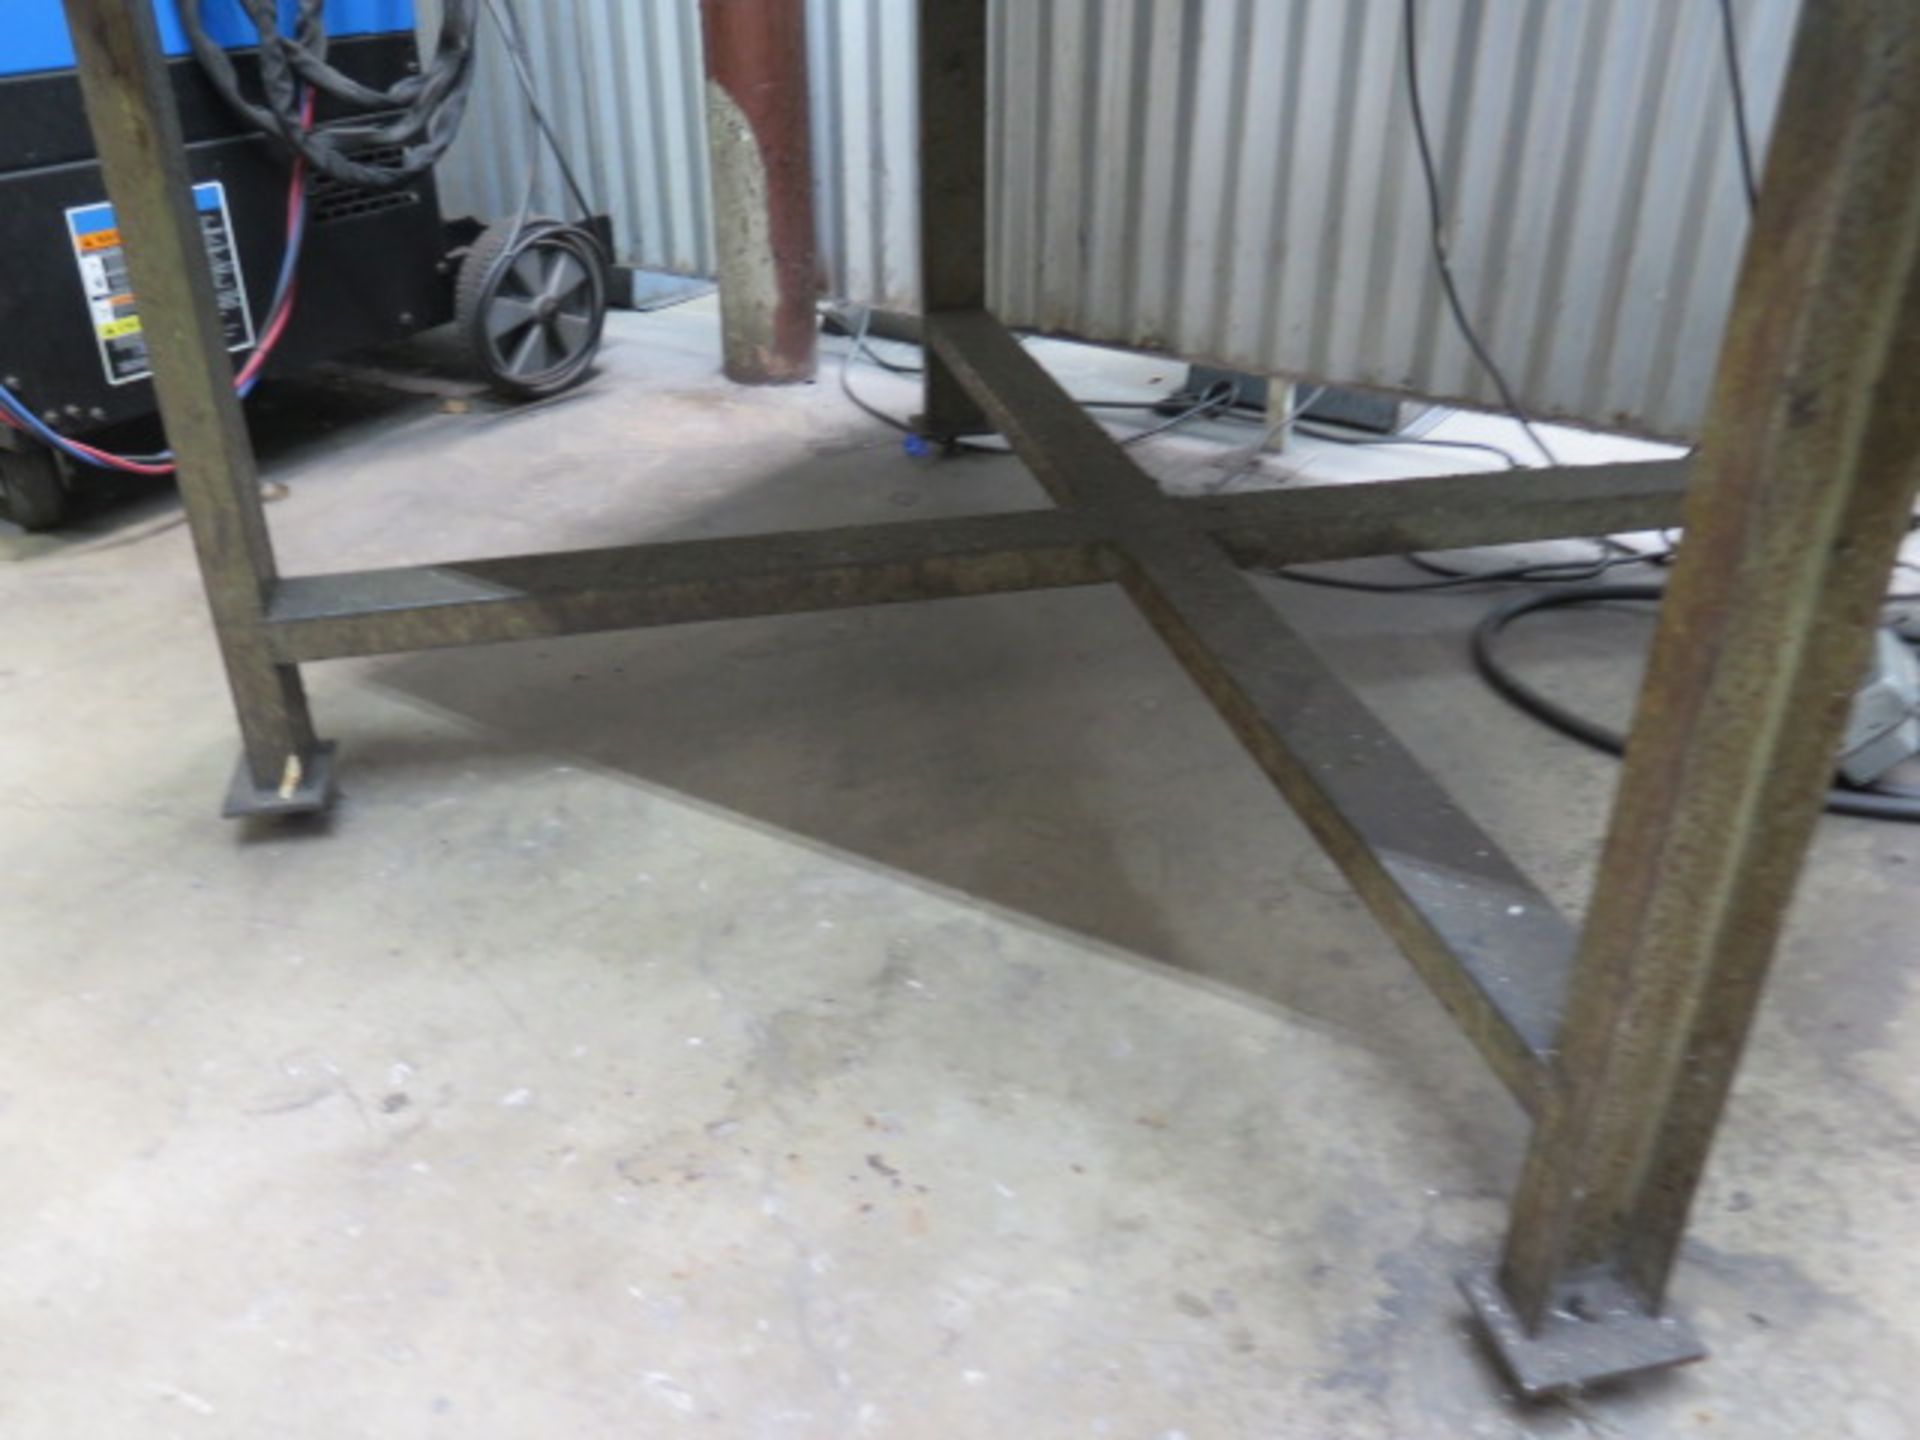 48” x 48” Steel Welding Table w/ Morgan 4” Bench Vise (SOLD AS-IS - NO WARRANTY) - Image 6 of 6